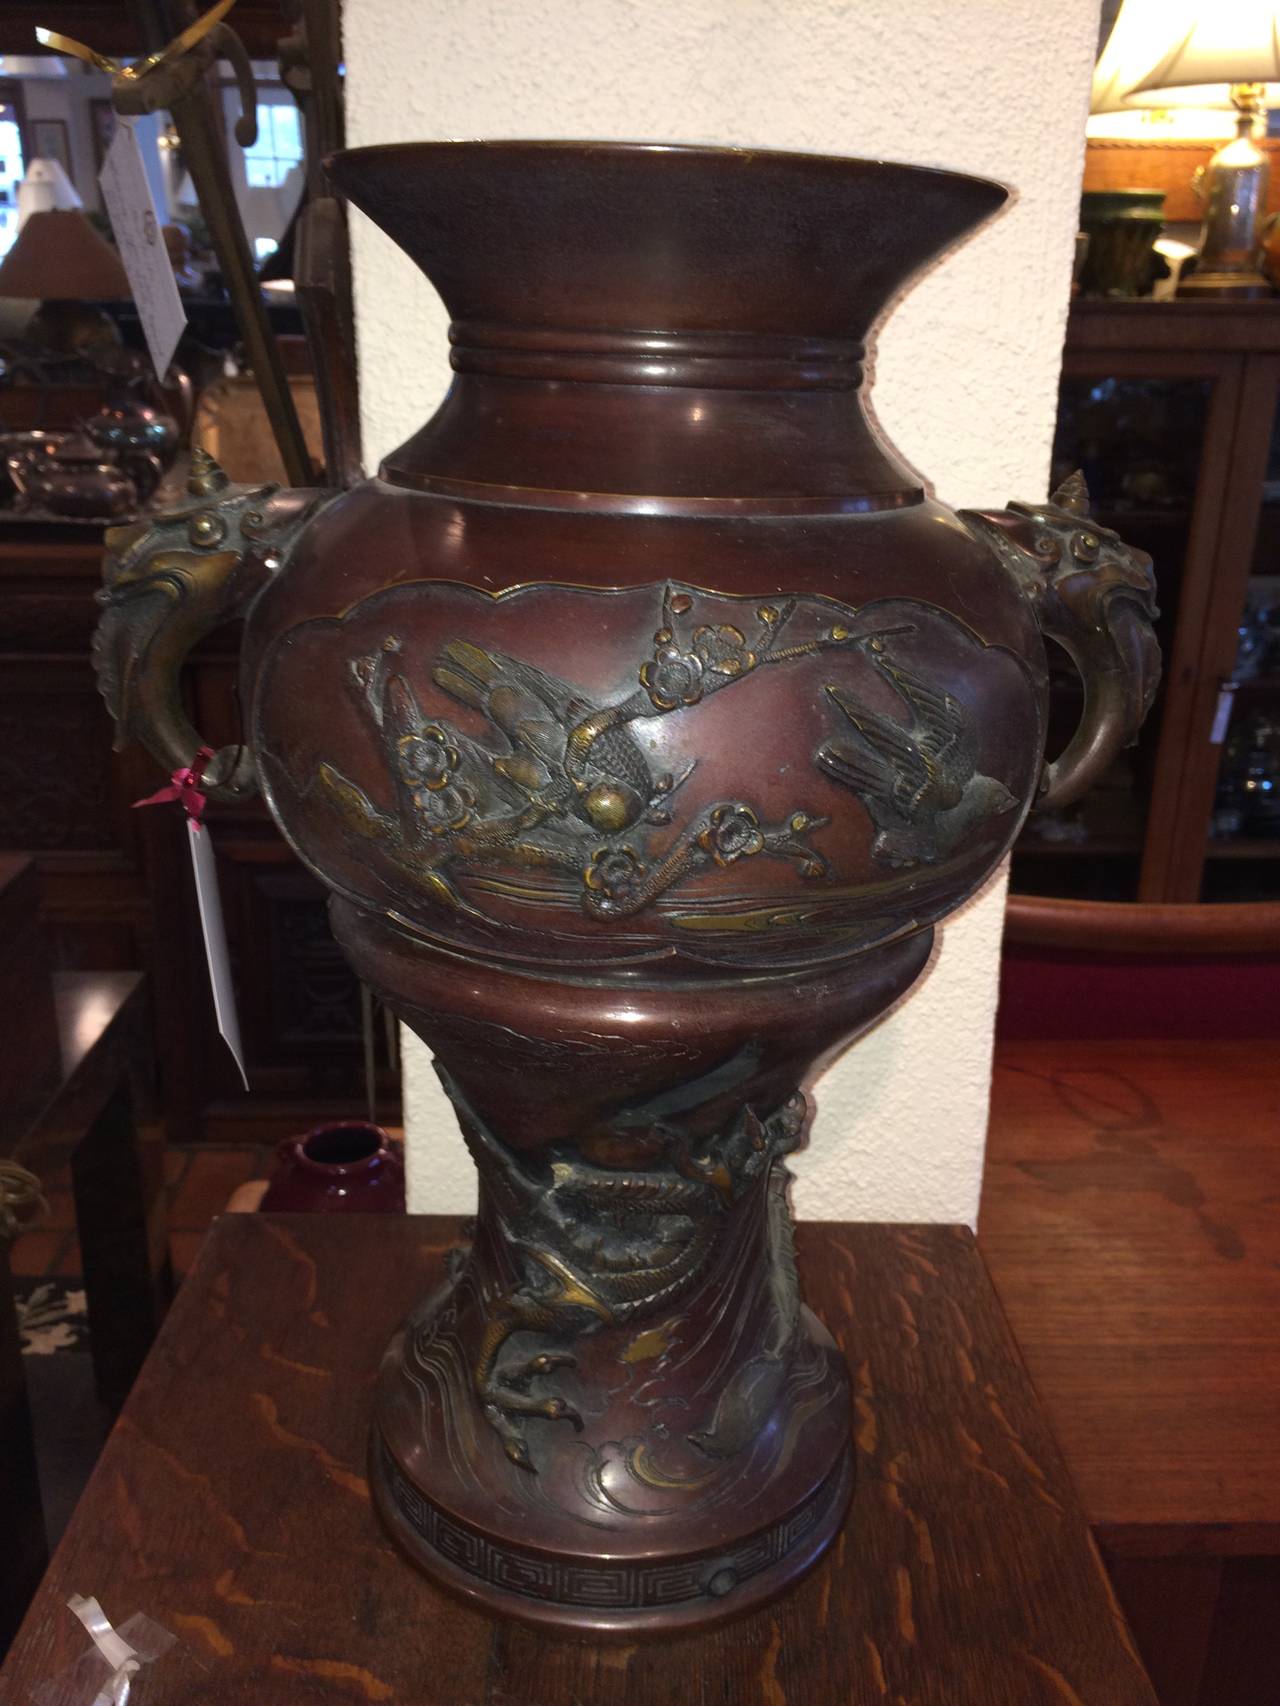 Large Meiji period bronze twin handled urn with decoration. Decoration consists of raised birds, branches with cherry blossoms and a dragon. Nice patina to this gorgeous vase that can also be turned into a lamp. Unfortunately the head of the dragon